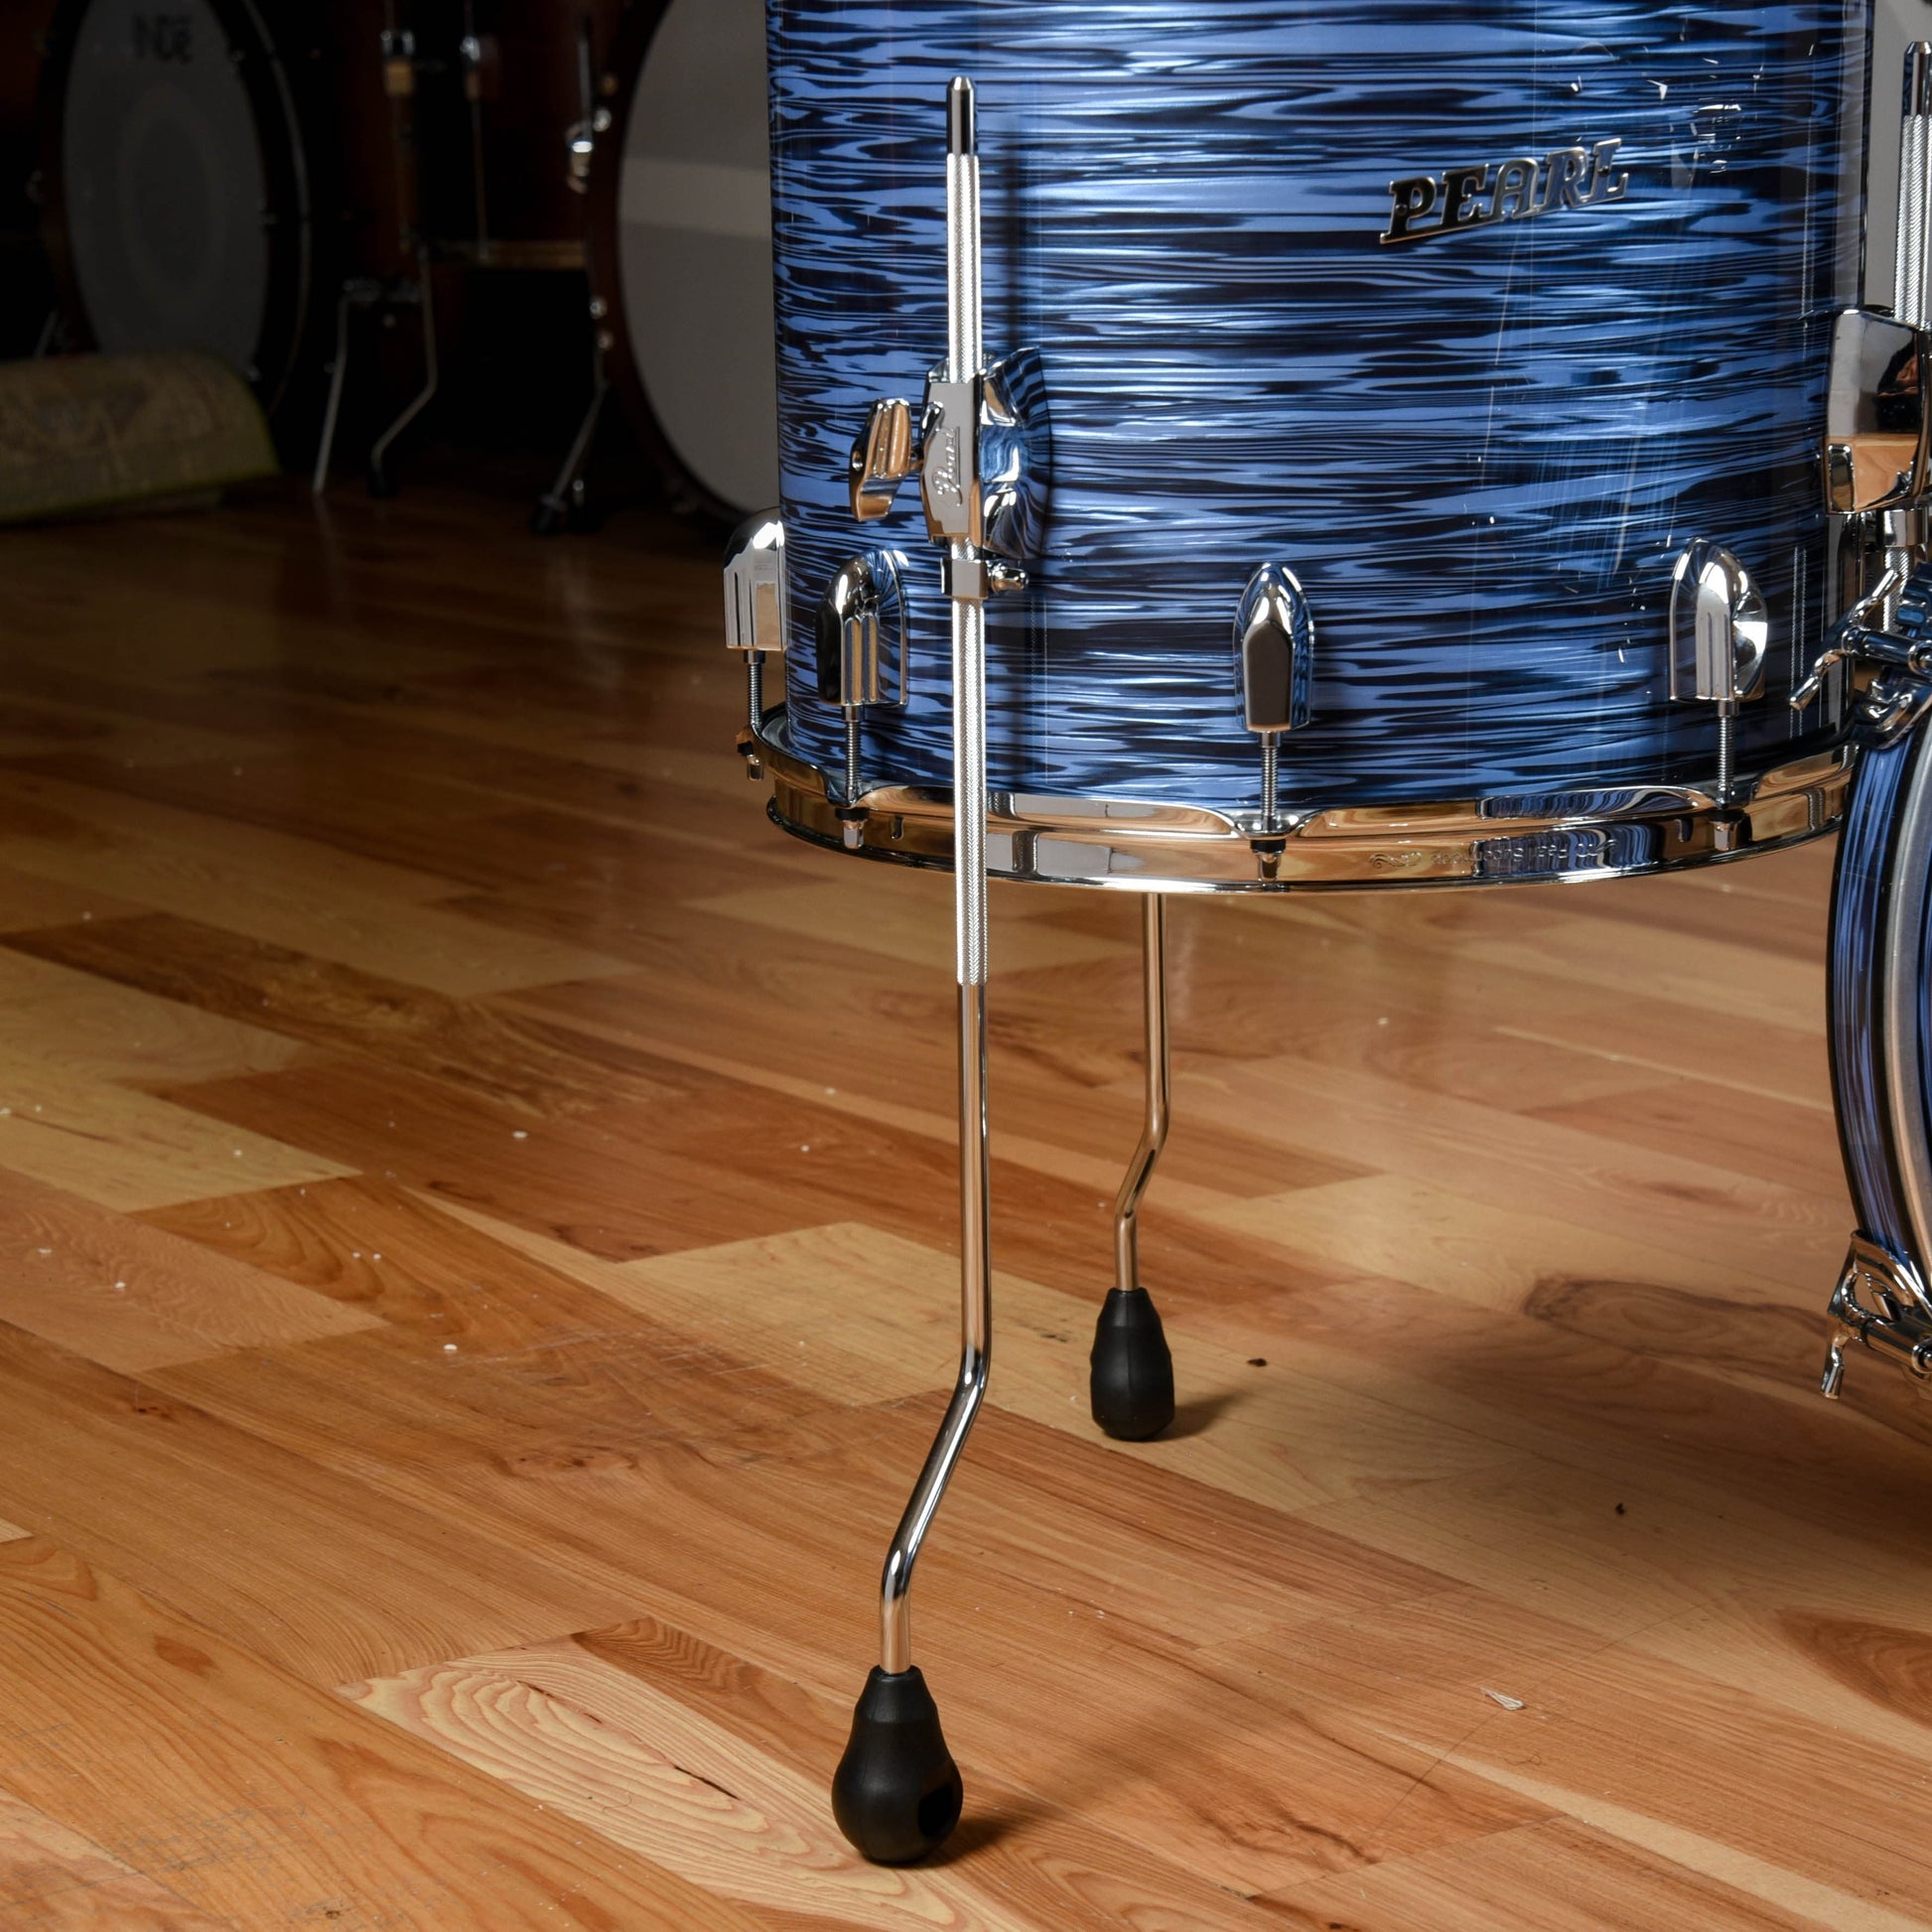 Pearl President Series Deluxe 12/14/20 3pc. Drum Kit Ocean Ripple Drums and Percussion / Acoustic Drums / Full Acoustic Kits